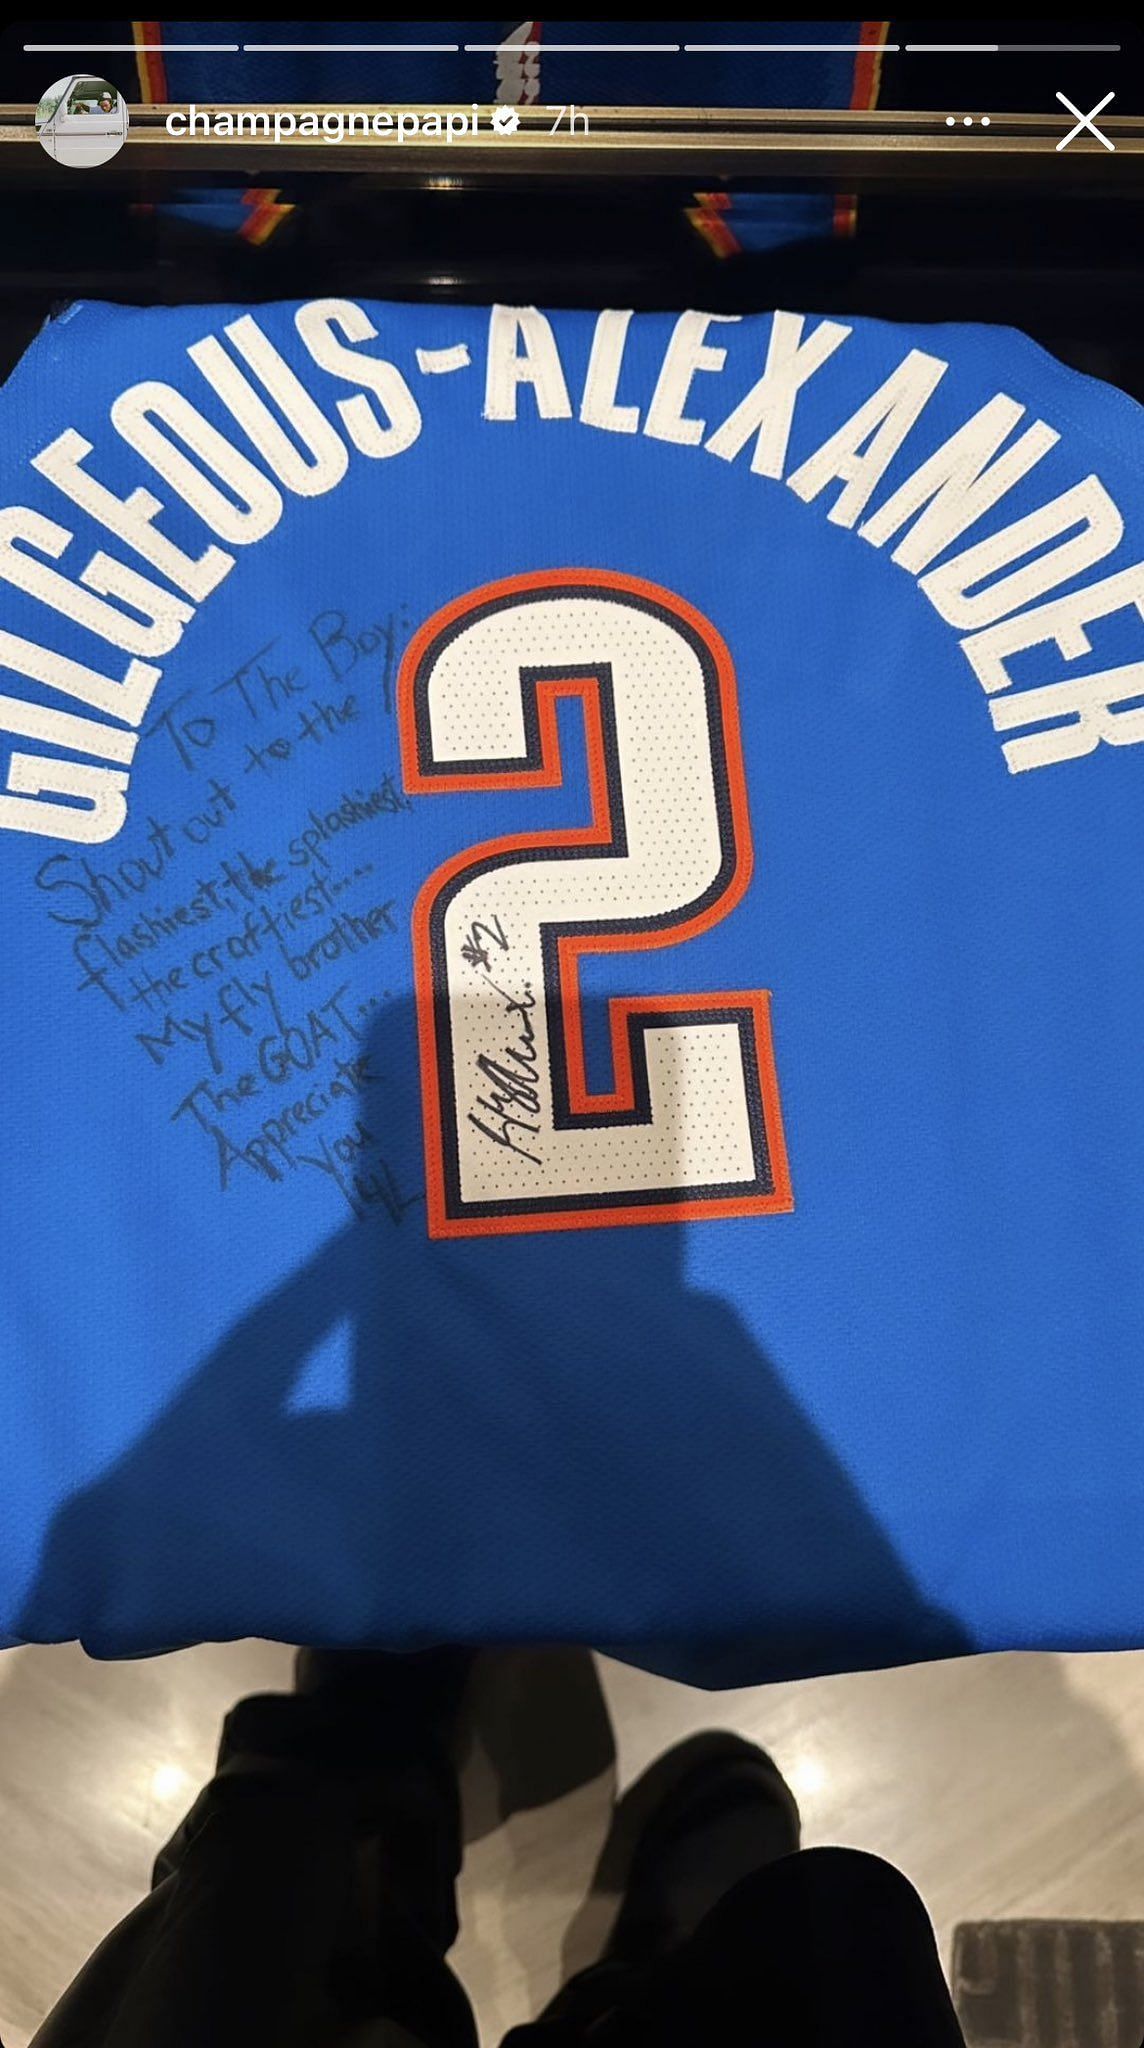 Flashiest, the splashiest, the craftiest”: Shai Gilgeous-Alexander gifts  Drake signed OKC jersey with special message